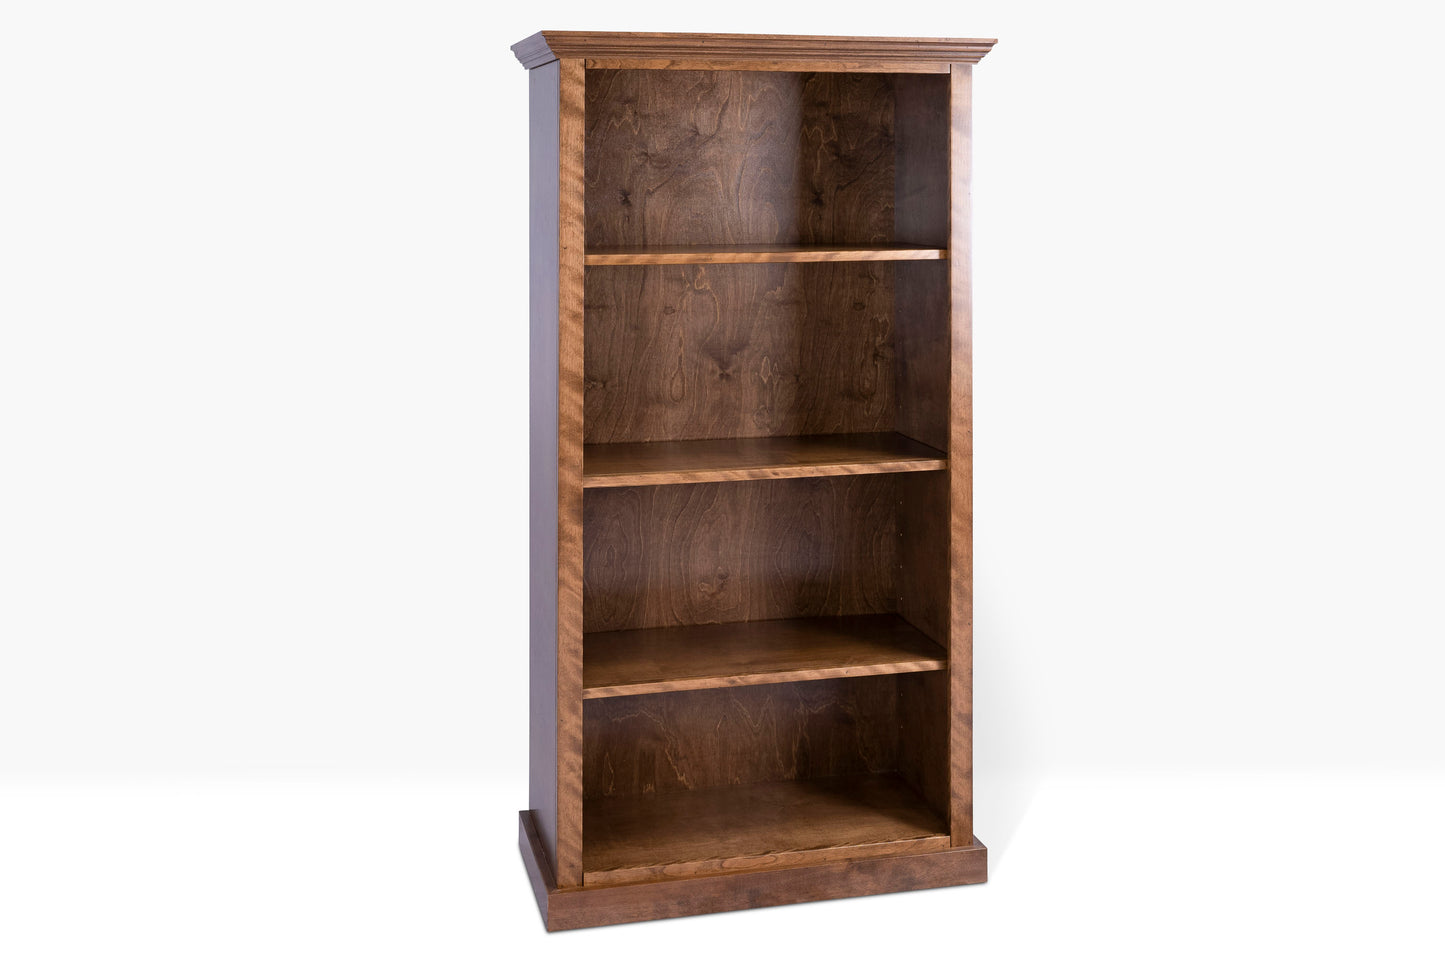 Berkshire Dover Bookcase, built in birch with adjustable shelves, shown in Toffee finish.